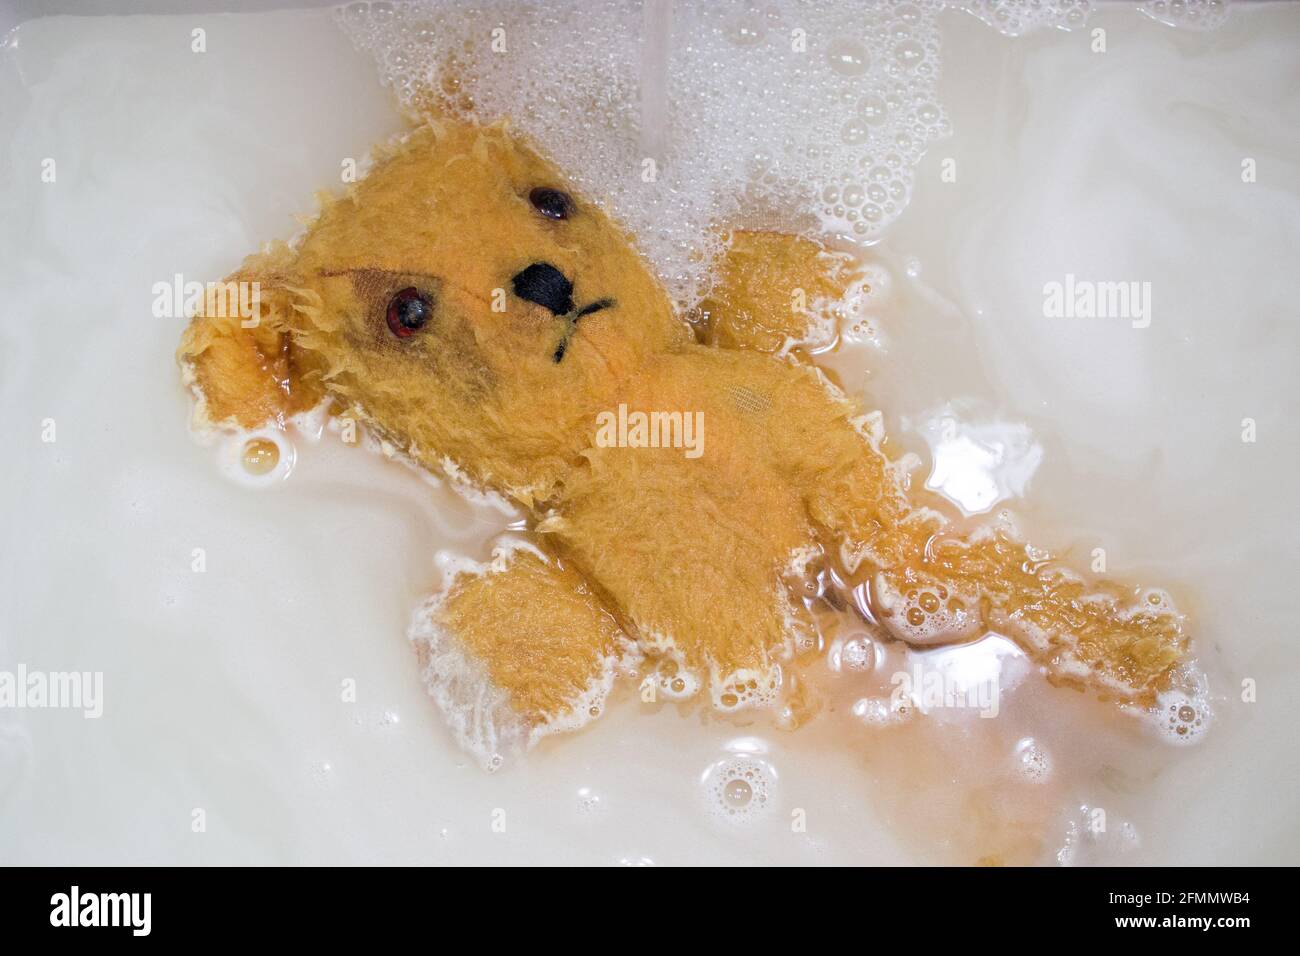 Much loved, 40-year-old teddy bear, lying on back, partially submerged in soapy water with suds Stock Photo